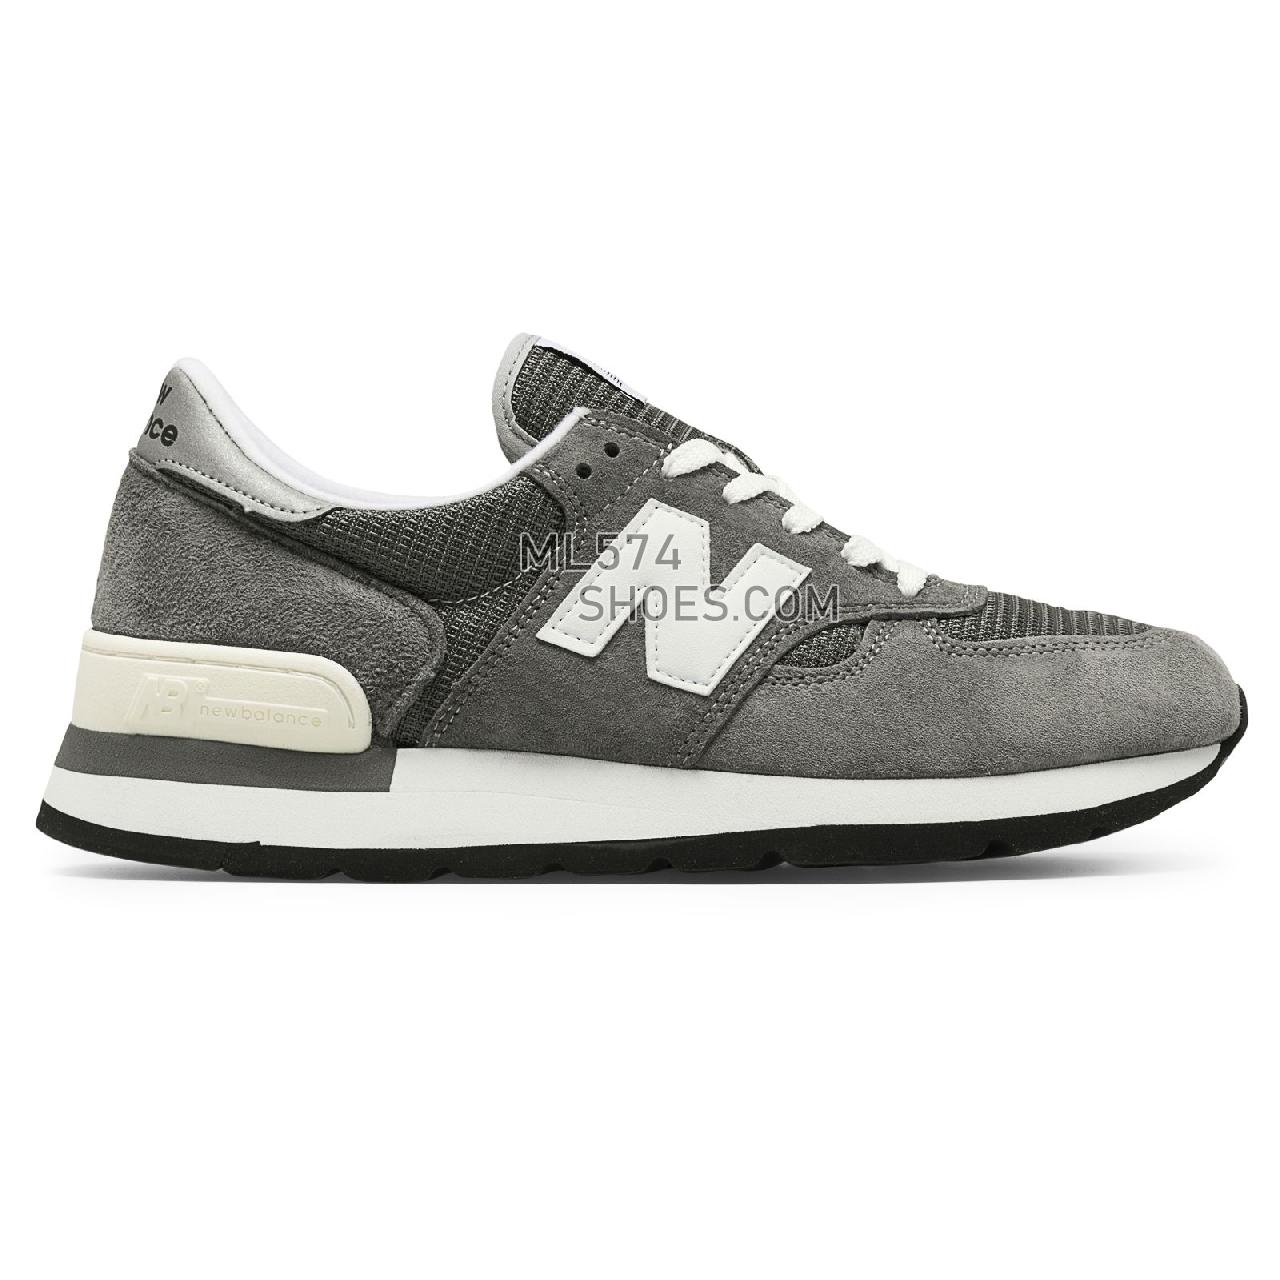 New Balance 990 Made in the USA Bringback - Men's 990 - Running Grey with White - M990GRY